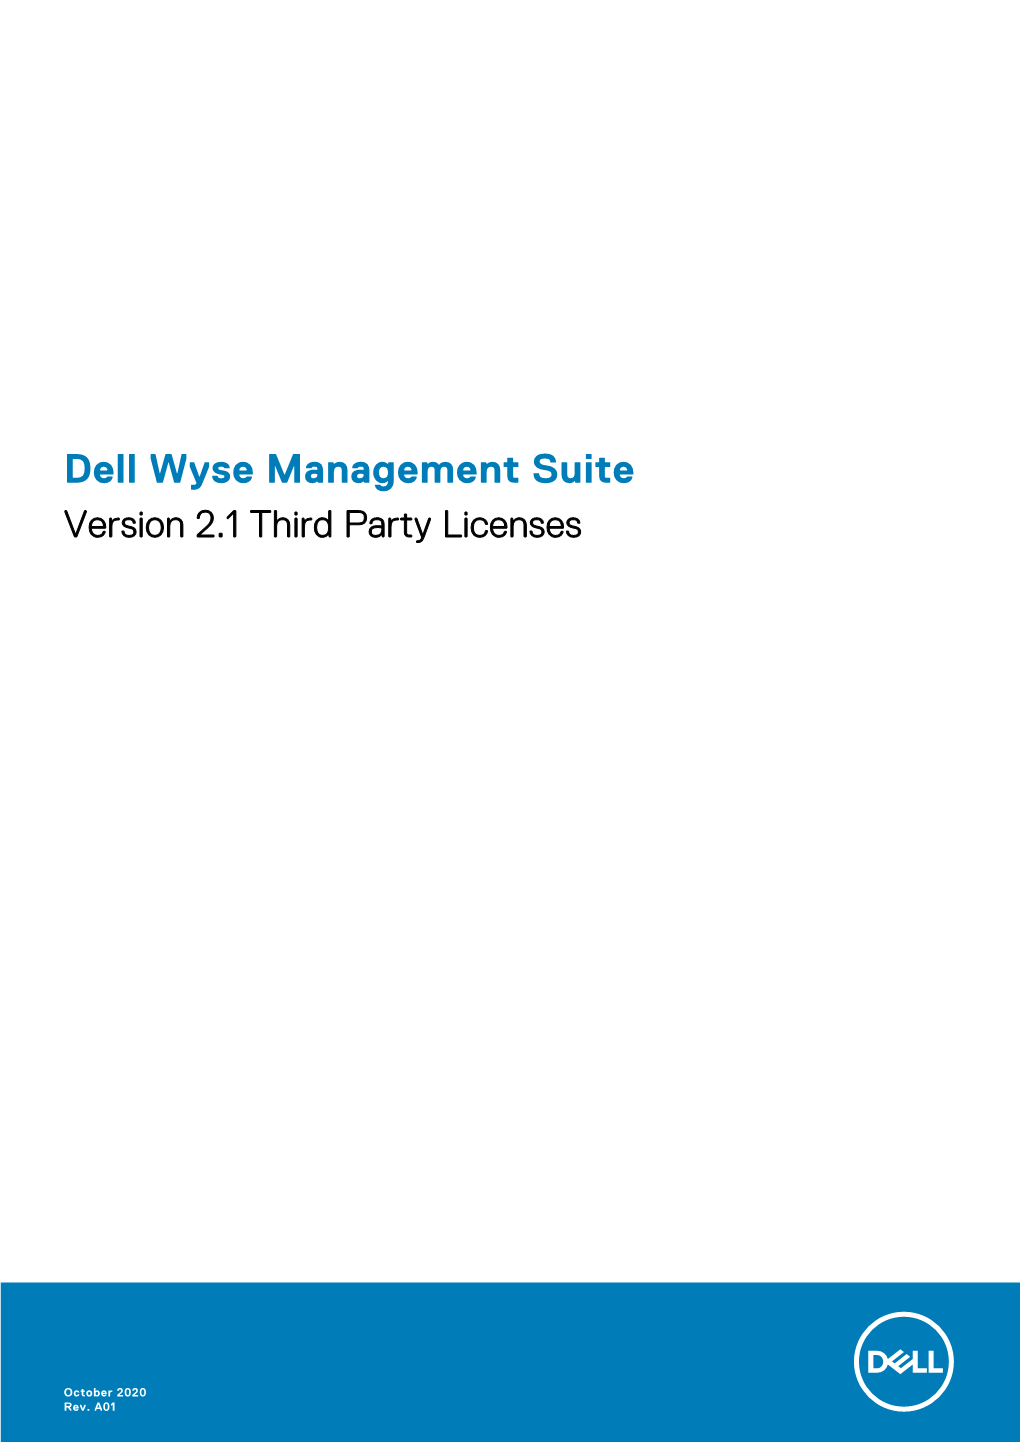 Dell Wyse Management Suite Version 2.1 Third Party Licenses